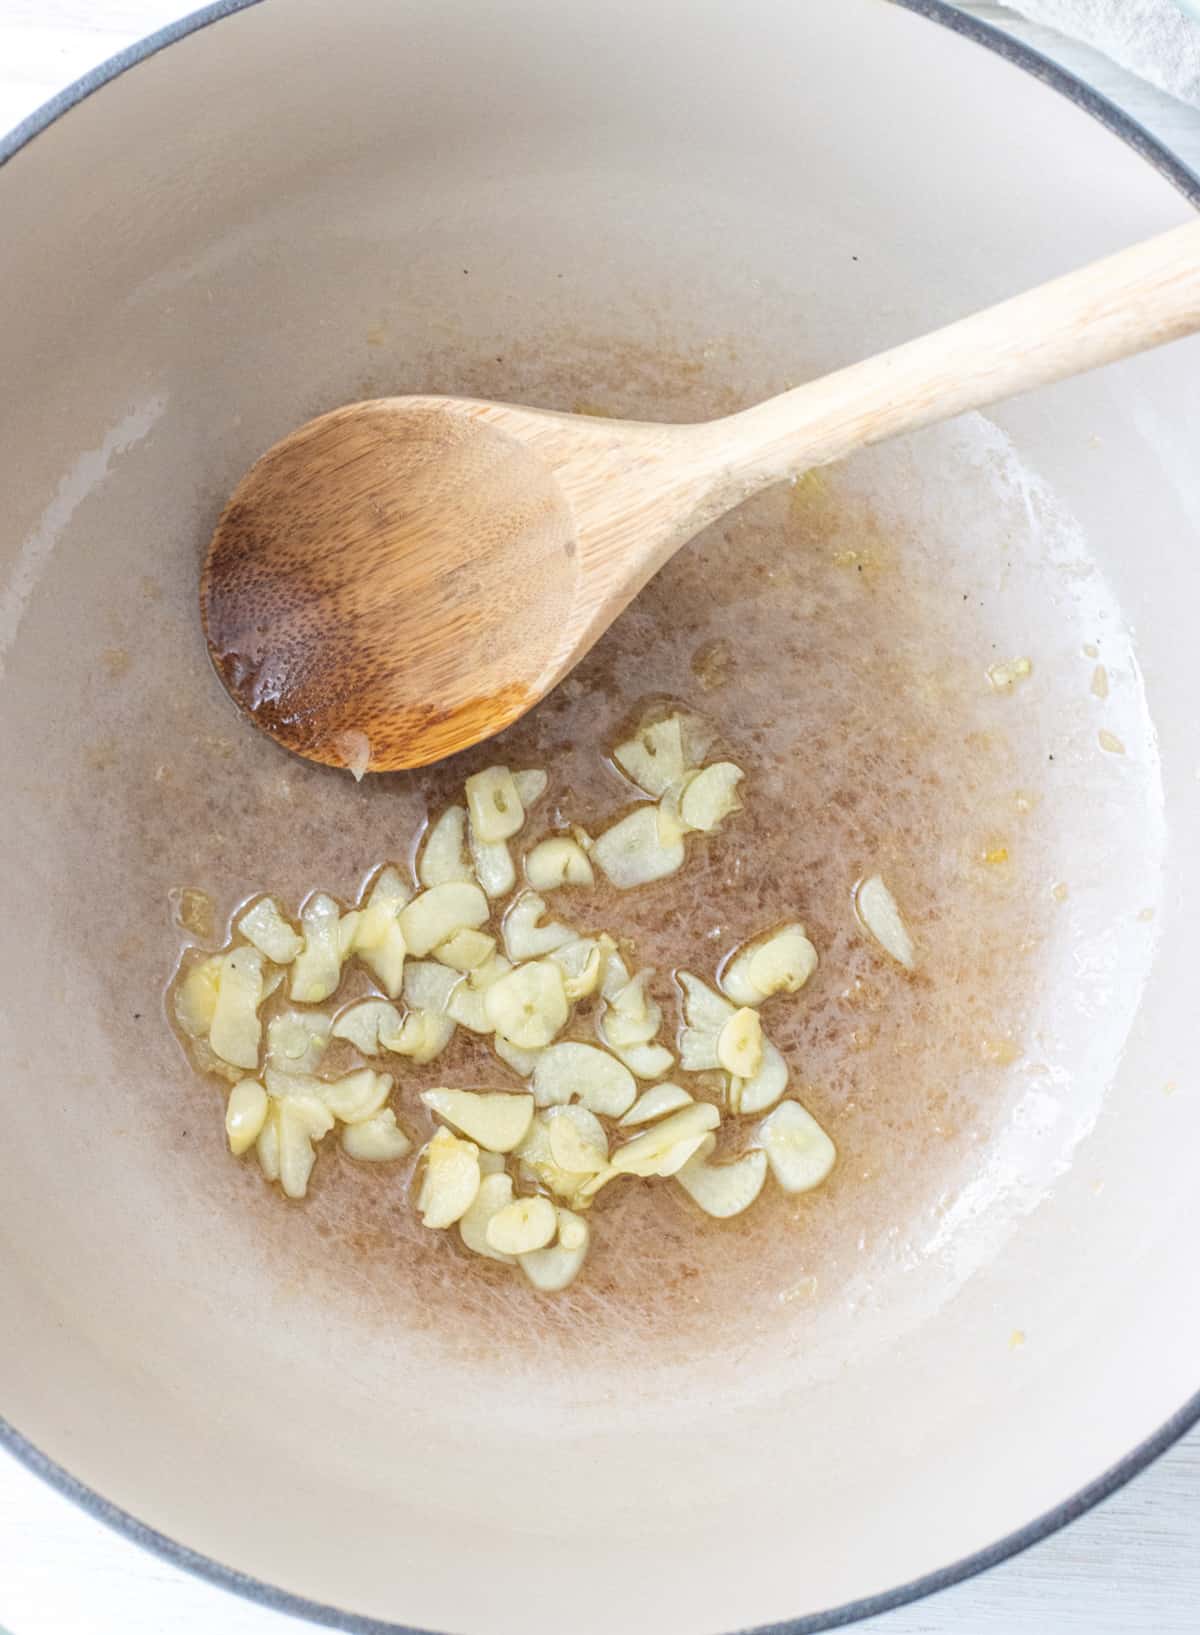 Sliced garlic simmering in oil in a pot with a wooden spoon.